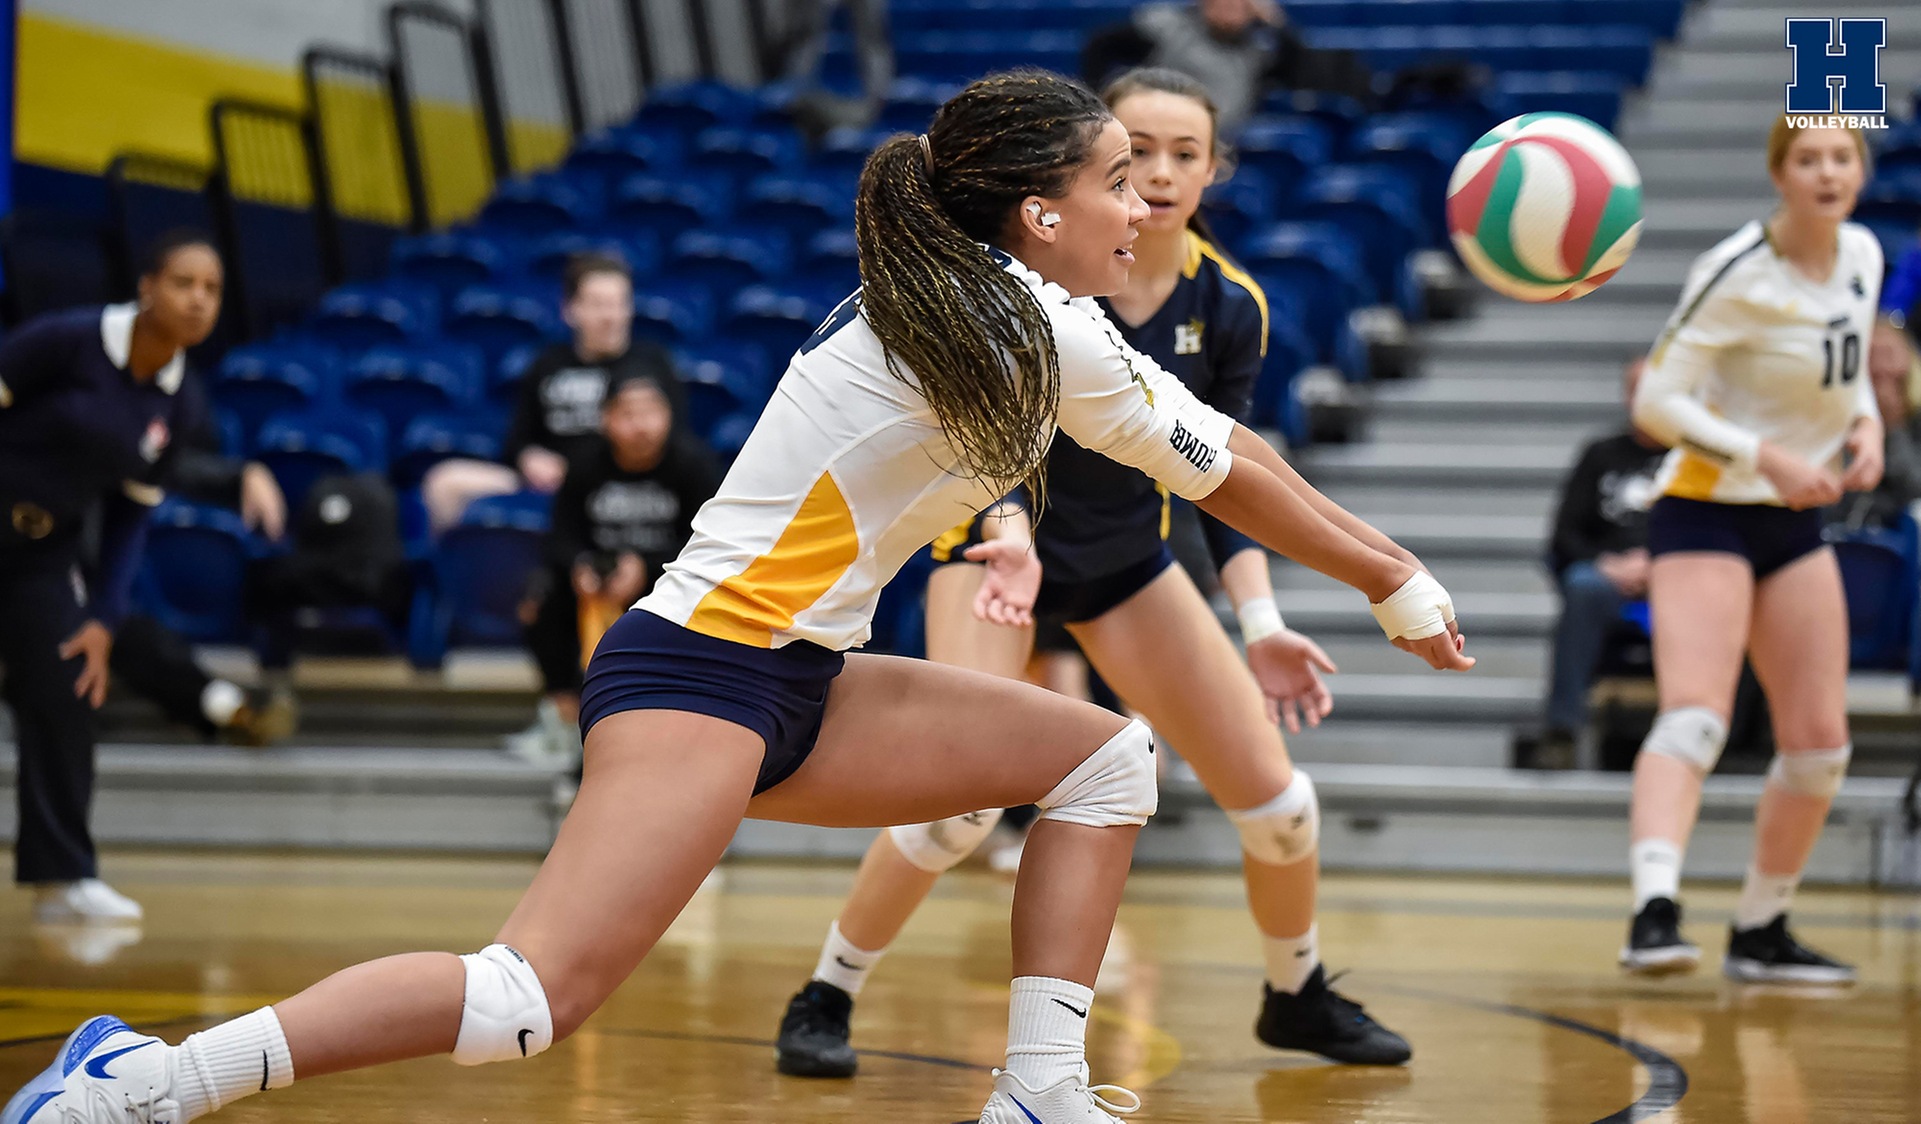 No. 15 Women's Volleyball Sweeps Cambrian, 3-0